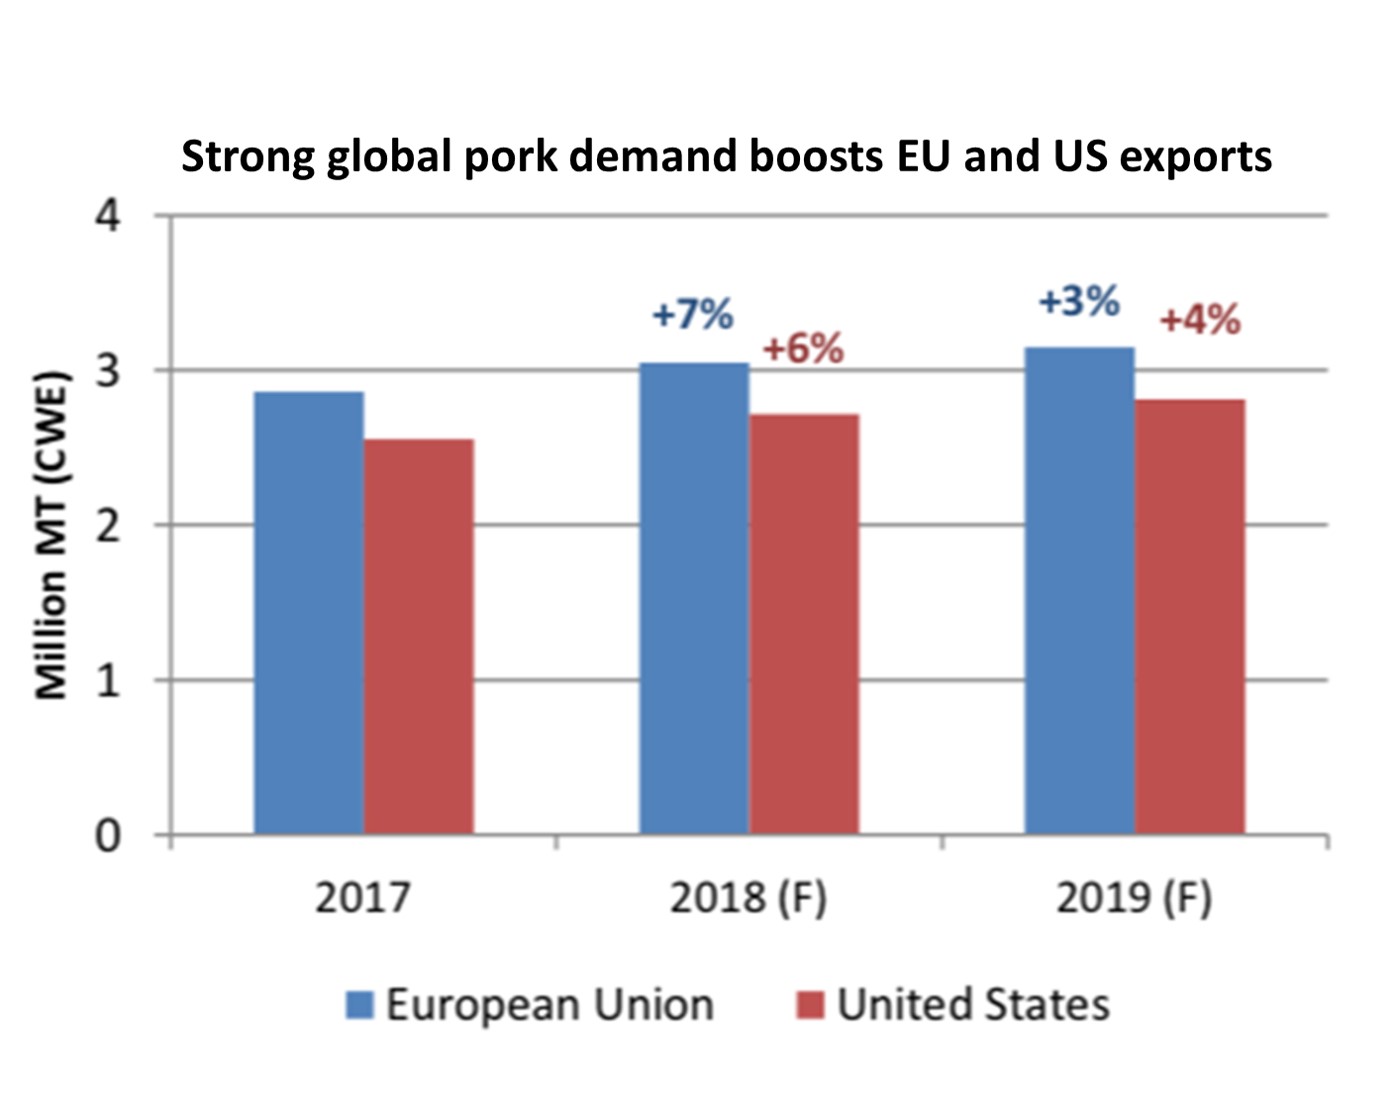 US and EU exports are predicted to continue growth this year due to strong global demands